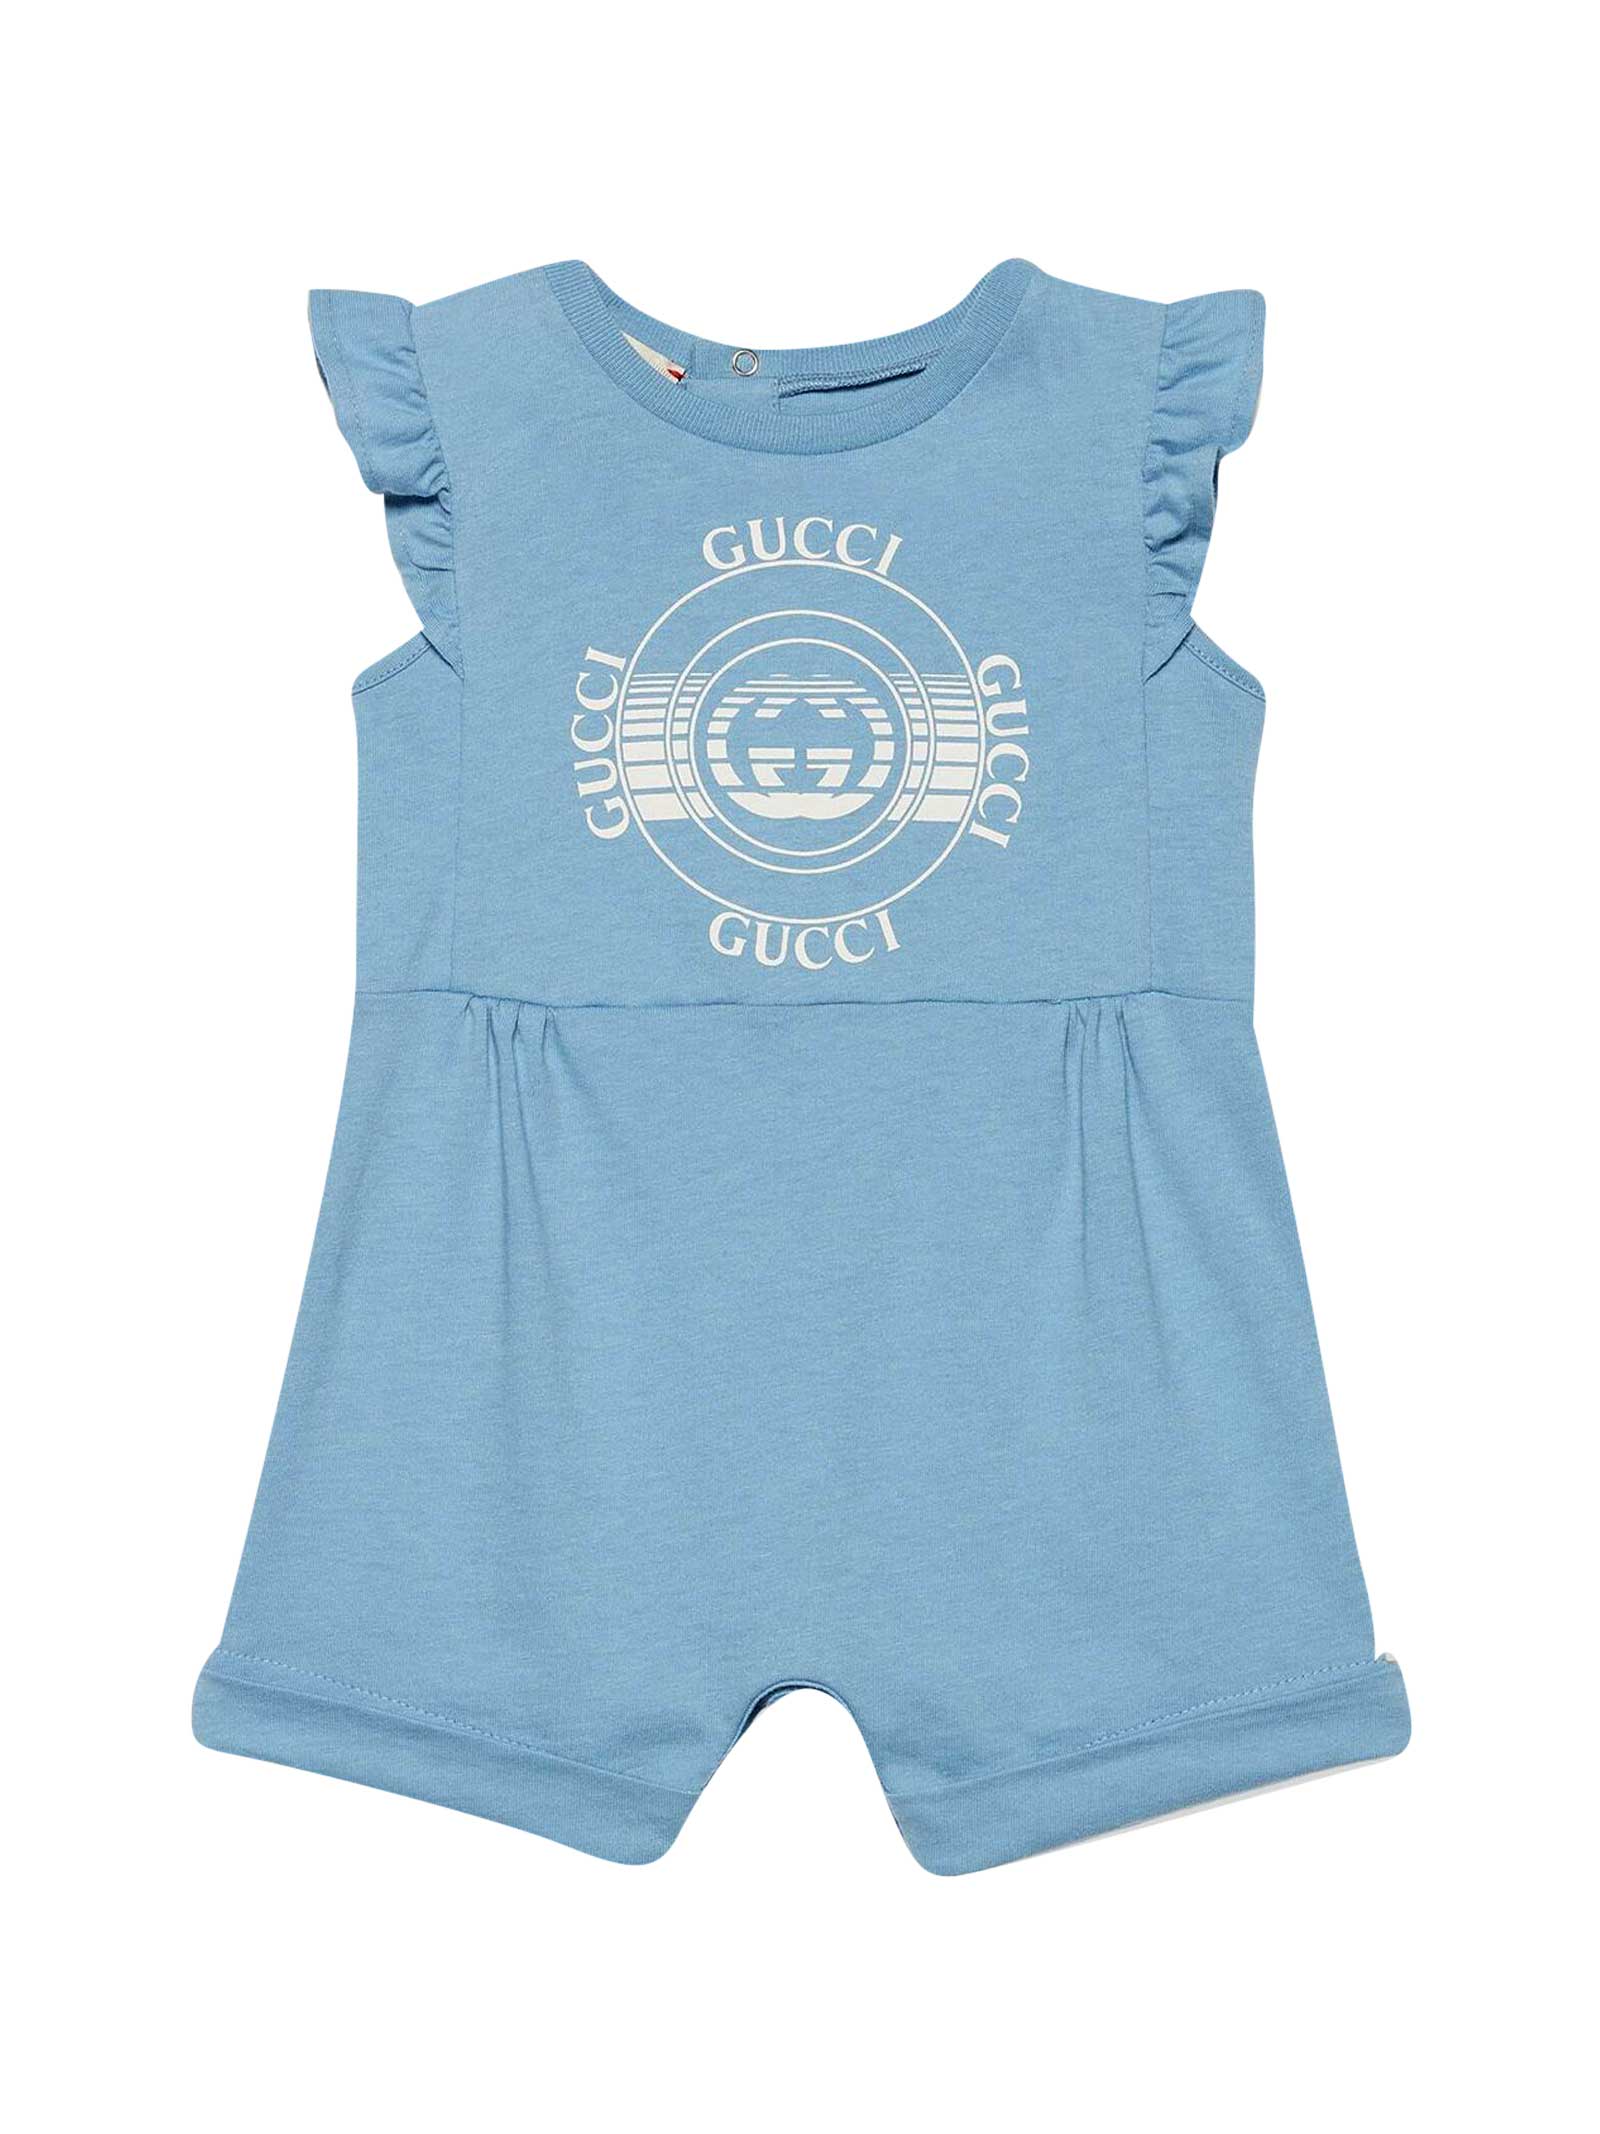 Gucci Babies' Blue Romper With White Print In Unica